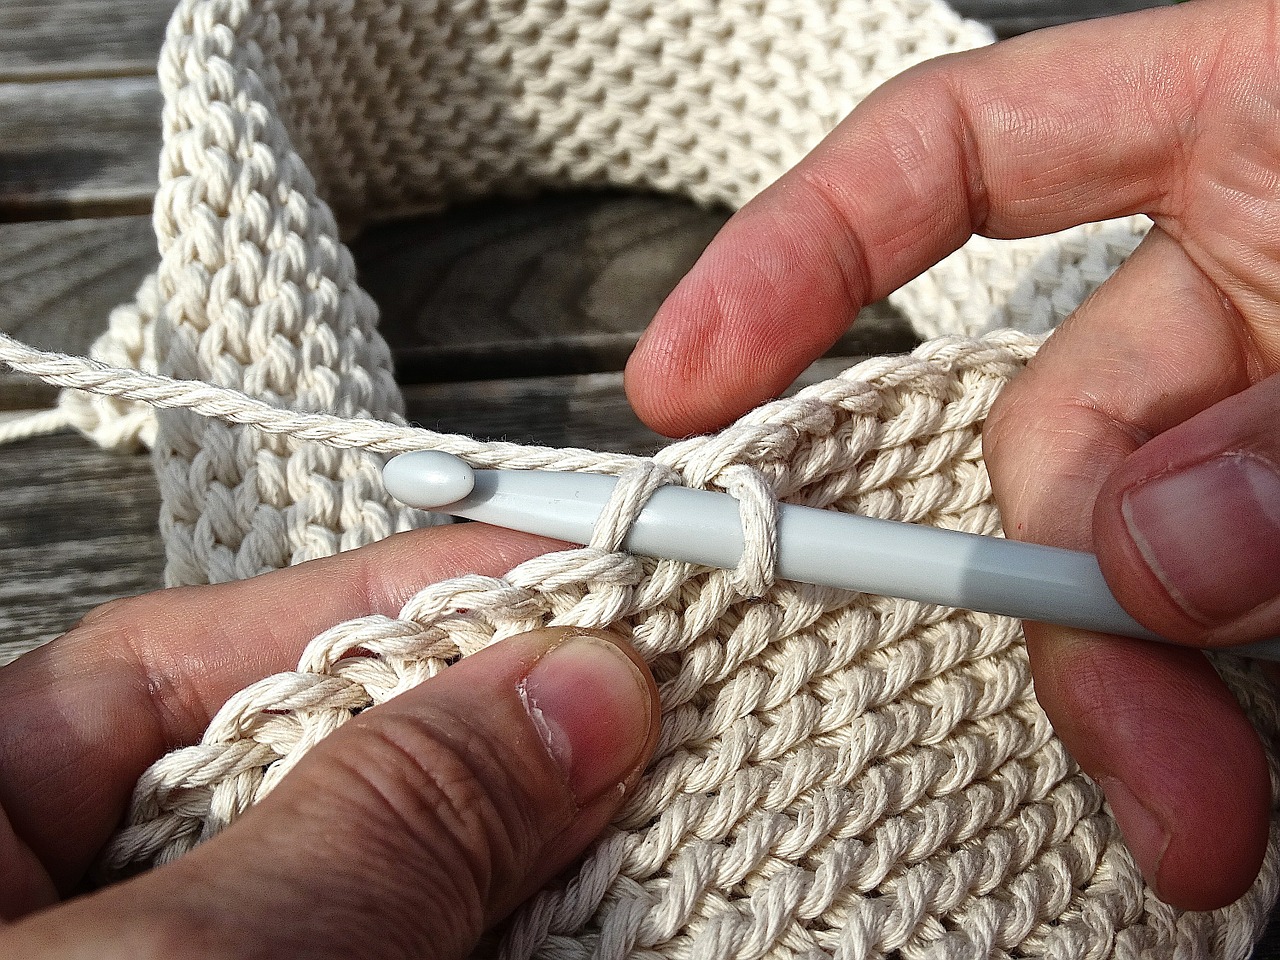 picture of hands holding crochet needle in yarn